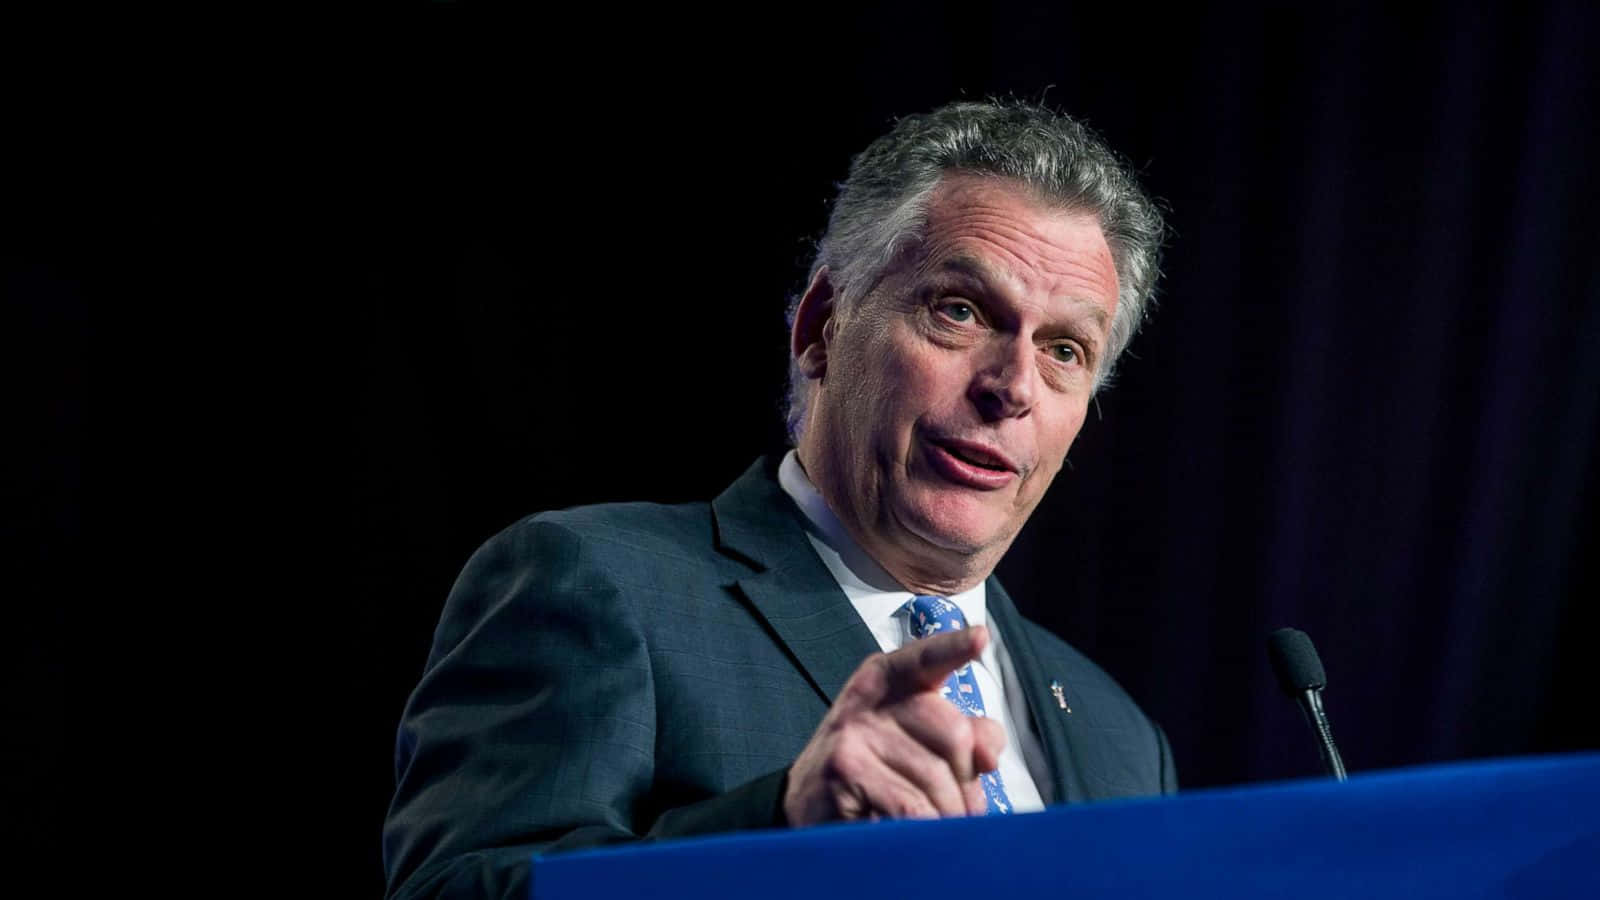 Terry McAuliffe Delivering a Speech at a Podium Wallpaper